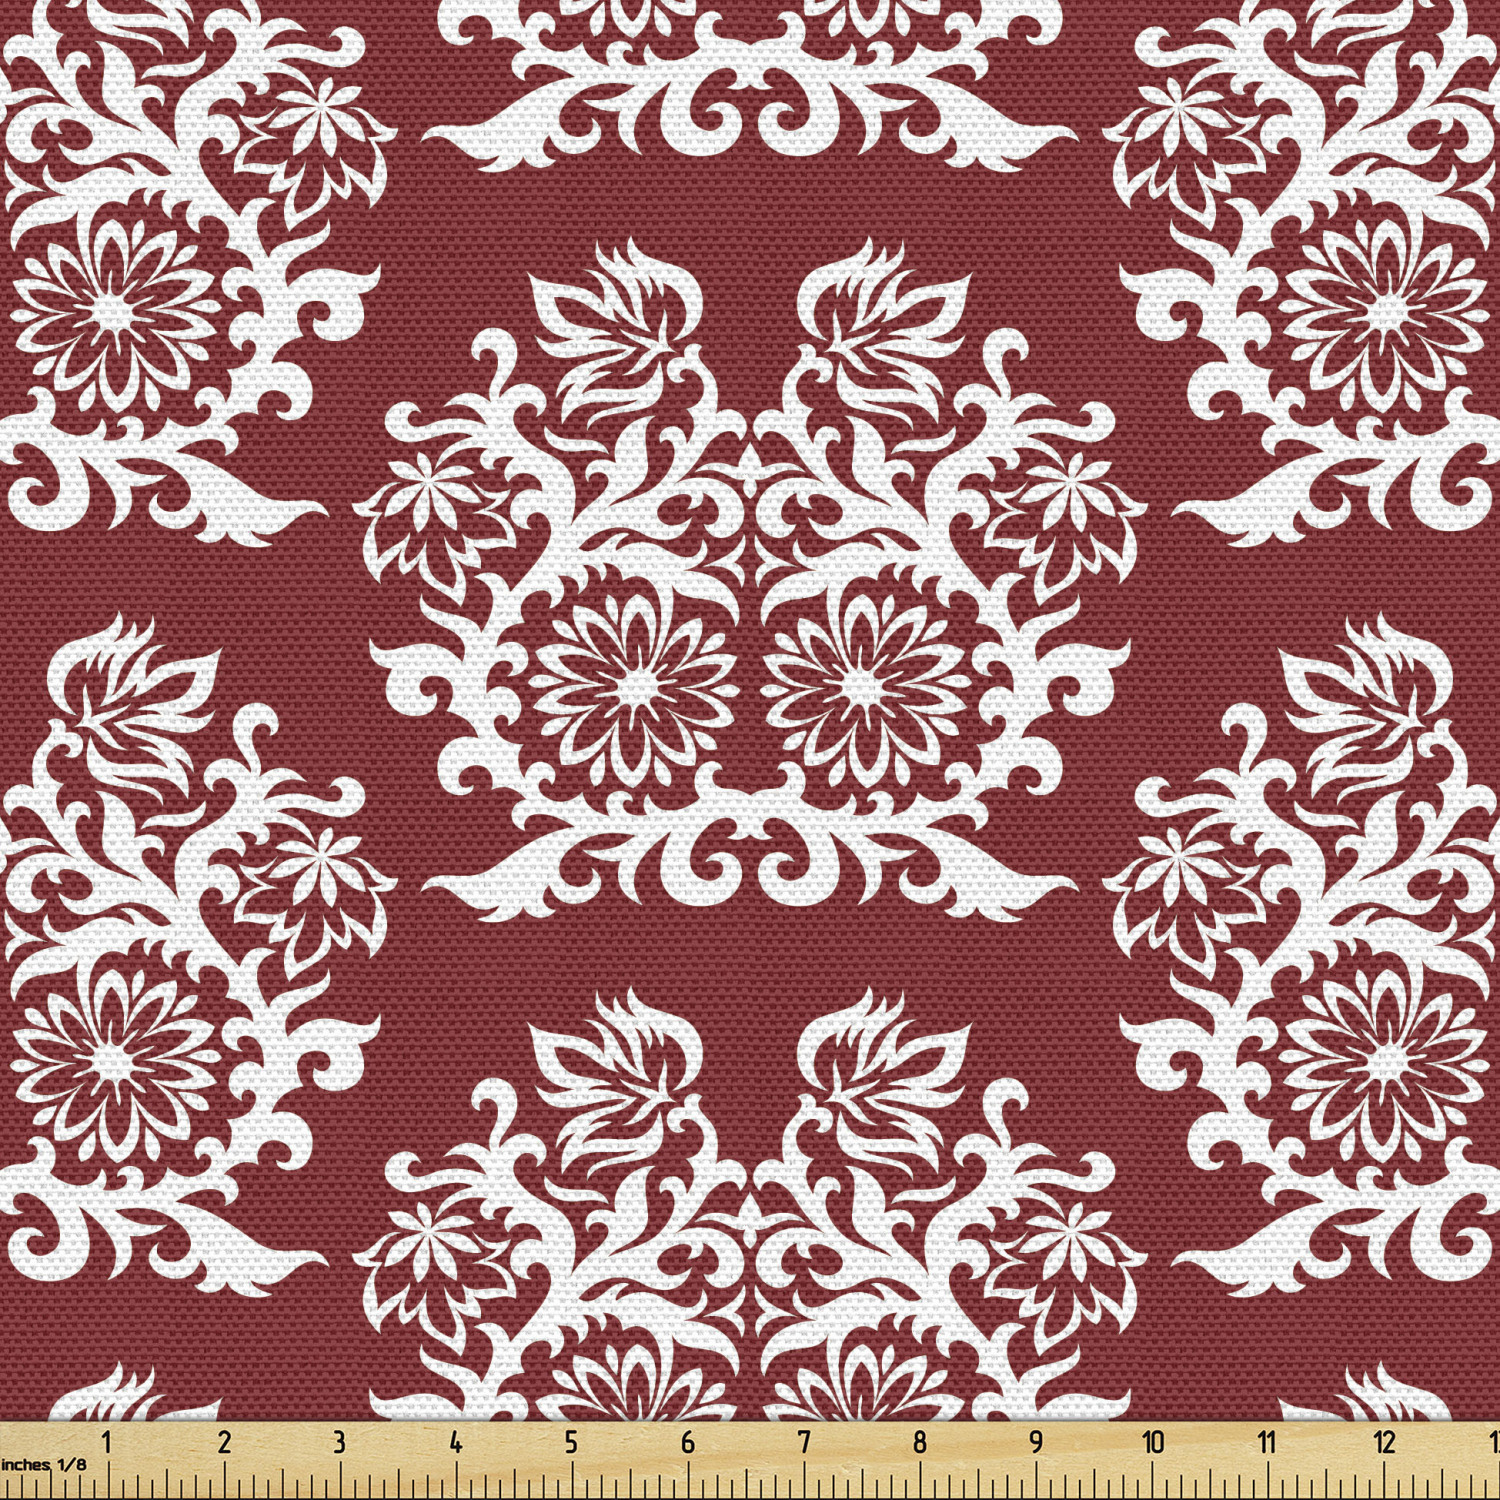 Vintage Fabric by the Yard, Oriental Style Flourishes Classic Romantic  Motifs Composition in Monotone, Decorative Upholstery Fabric for Sofas and  Home